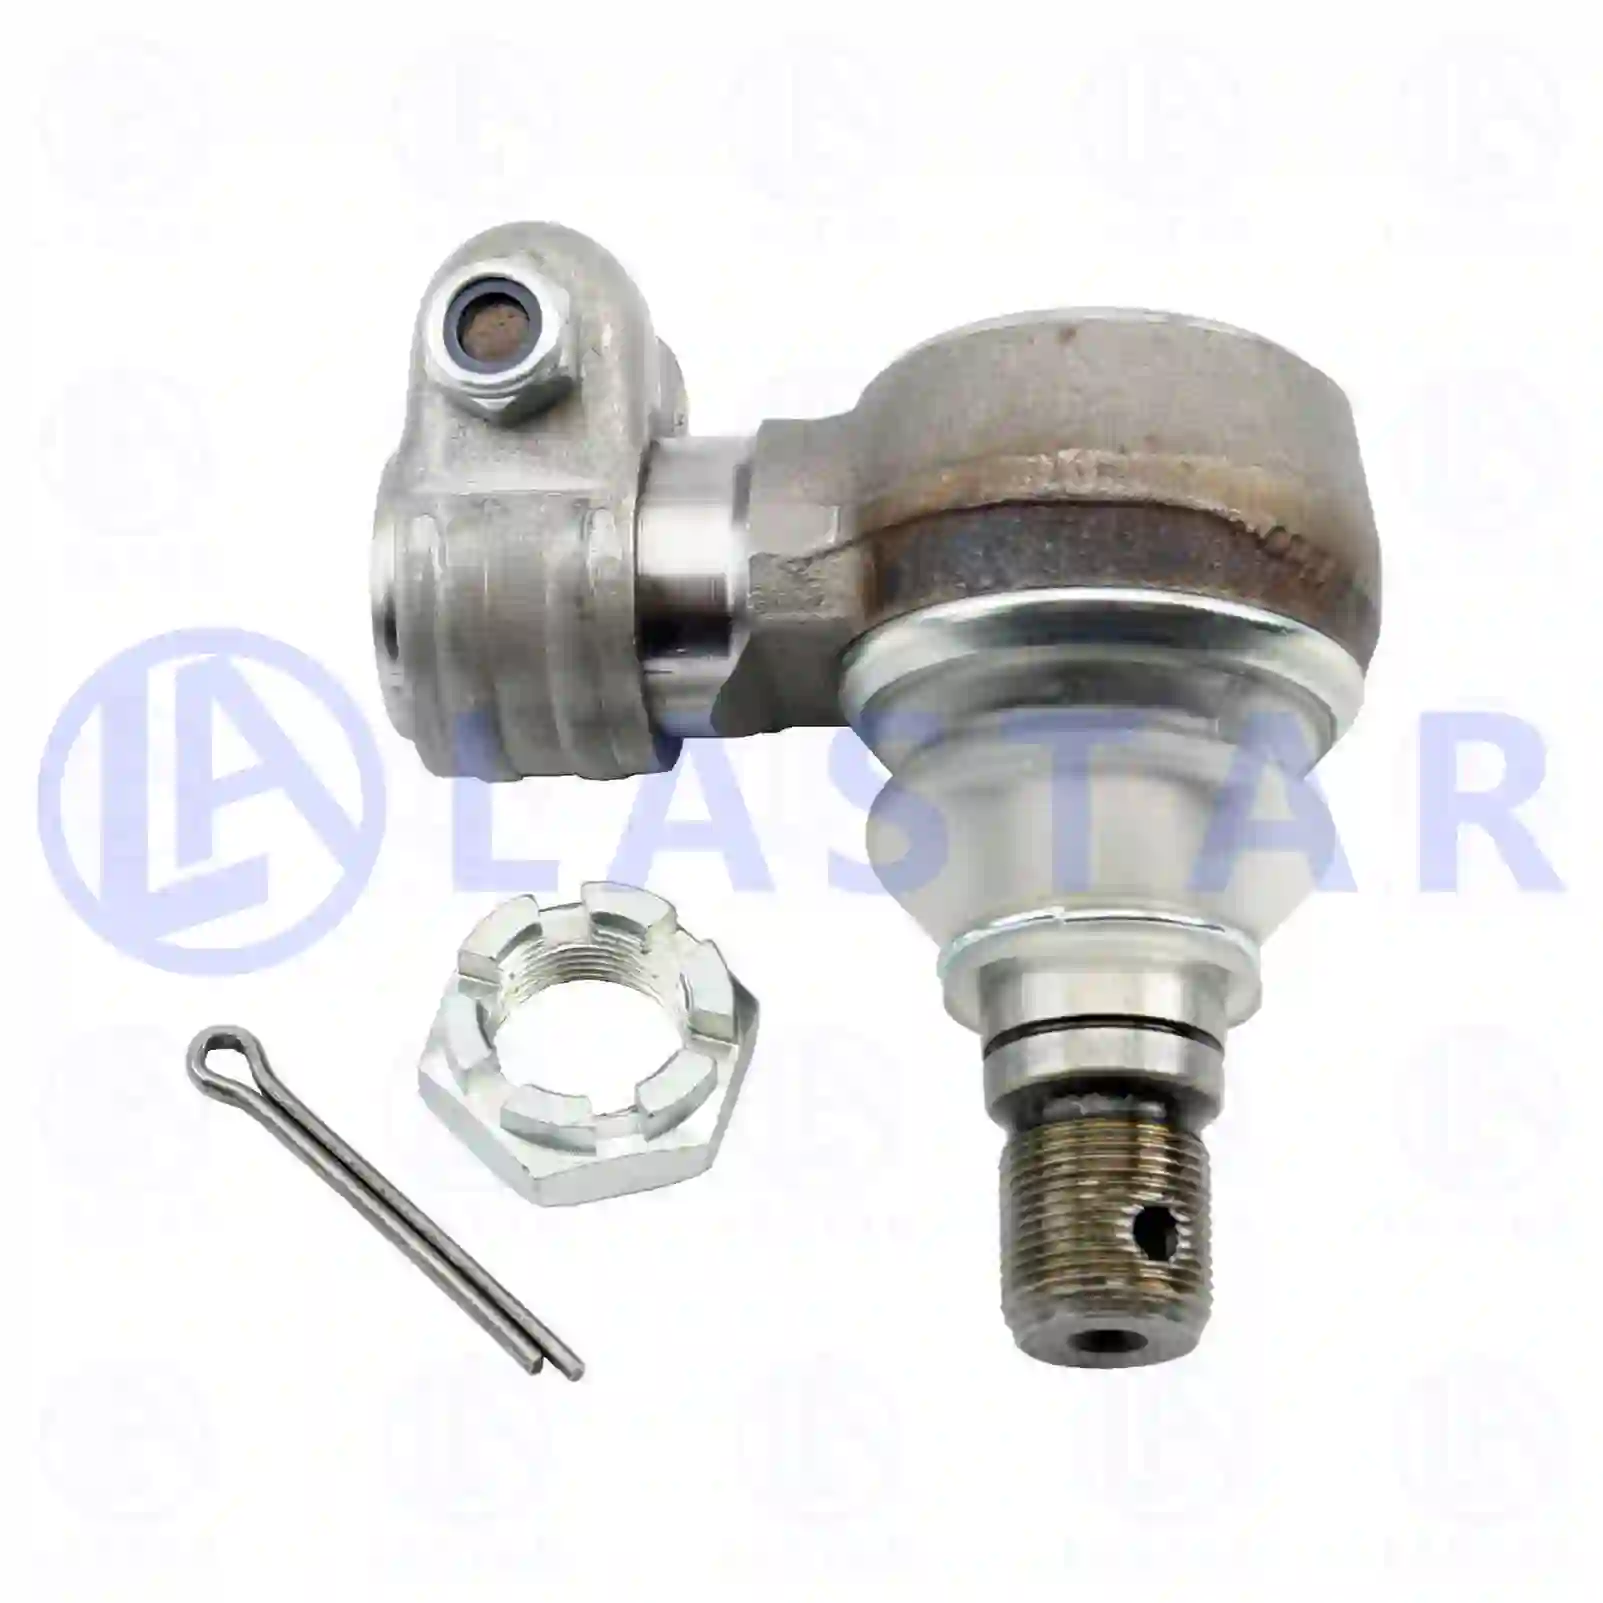 Rear Axle, Complete Ball joint, right hand thread, la no: 77730342 ,  oem no:42533102, 42533102, 81467036001, 81953016219, 81953016225, 81953016226, 81953016267, 81953016291, N1011019868, ZG40386-0008 Lastar Spare Part | Truck Spare Parts, Auotomotive Spare Parts